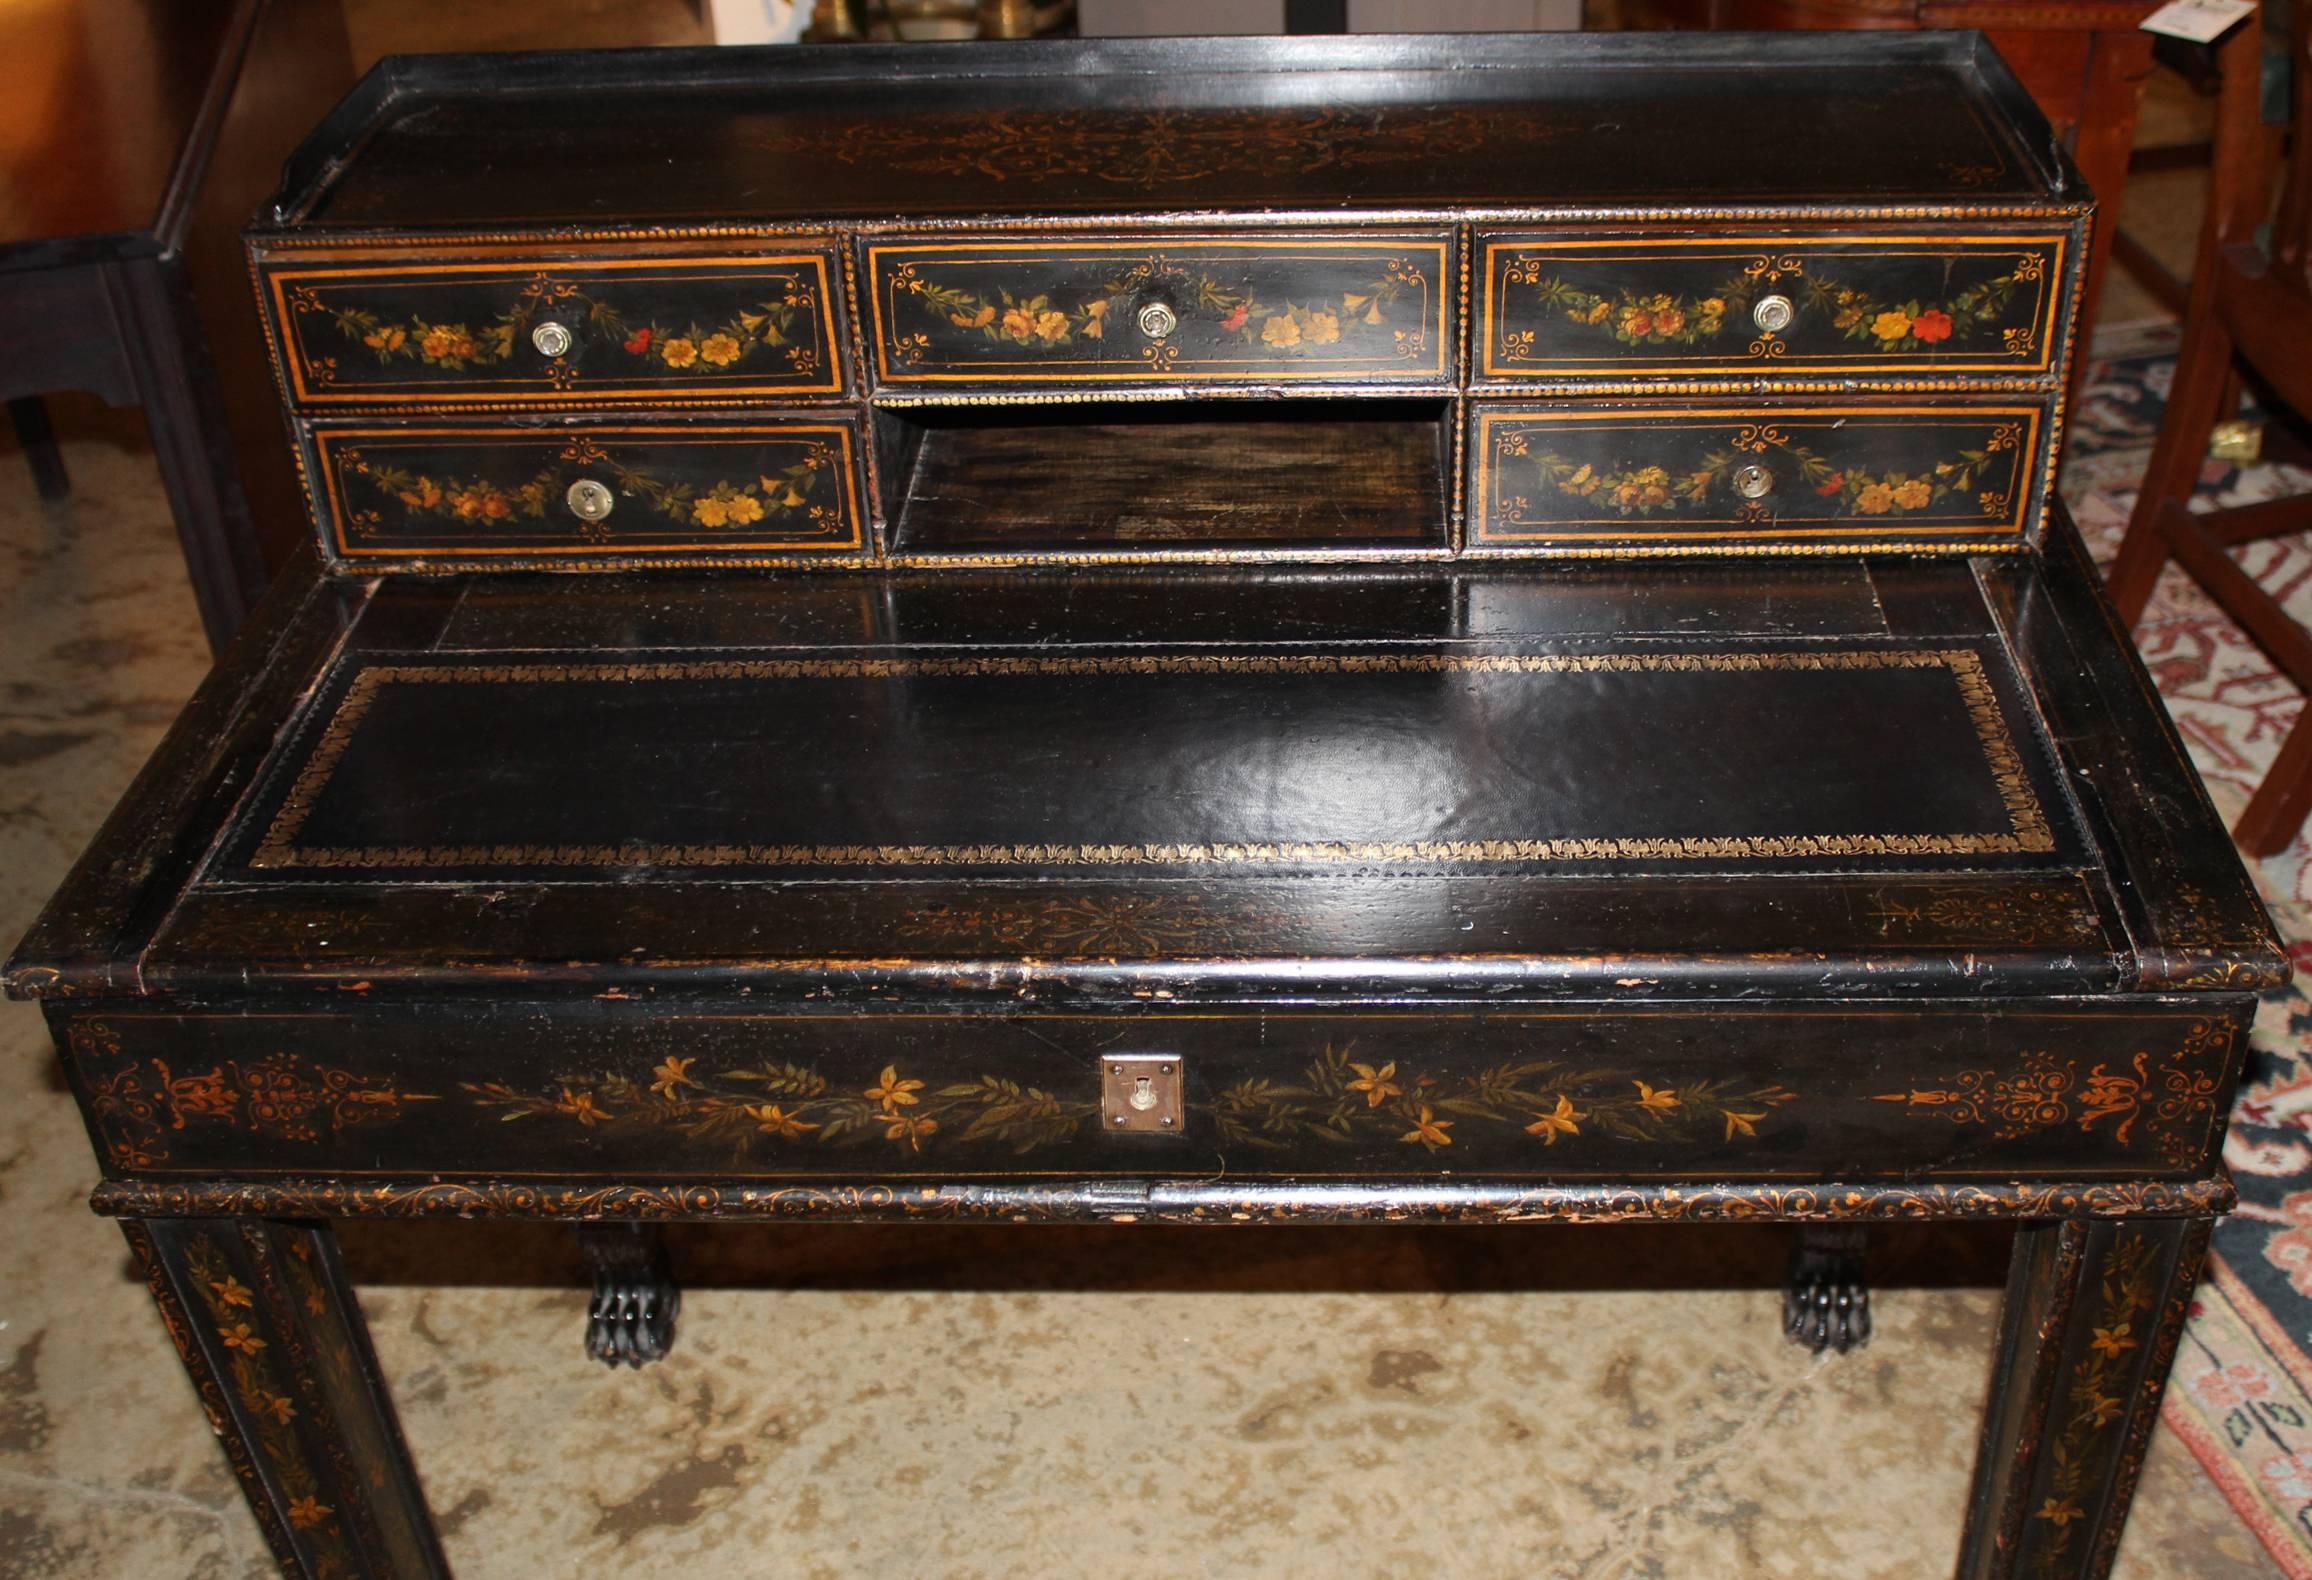 A fine polychrome writing desk in black lacquer with a five fitted drawer gallery, leather sliding writing surface with gilt border over a single frieze drawer, supported by tapered square legs terminating with paw feet. All with hand painted floral